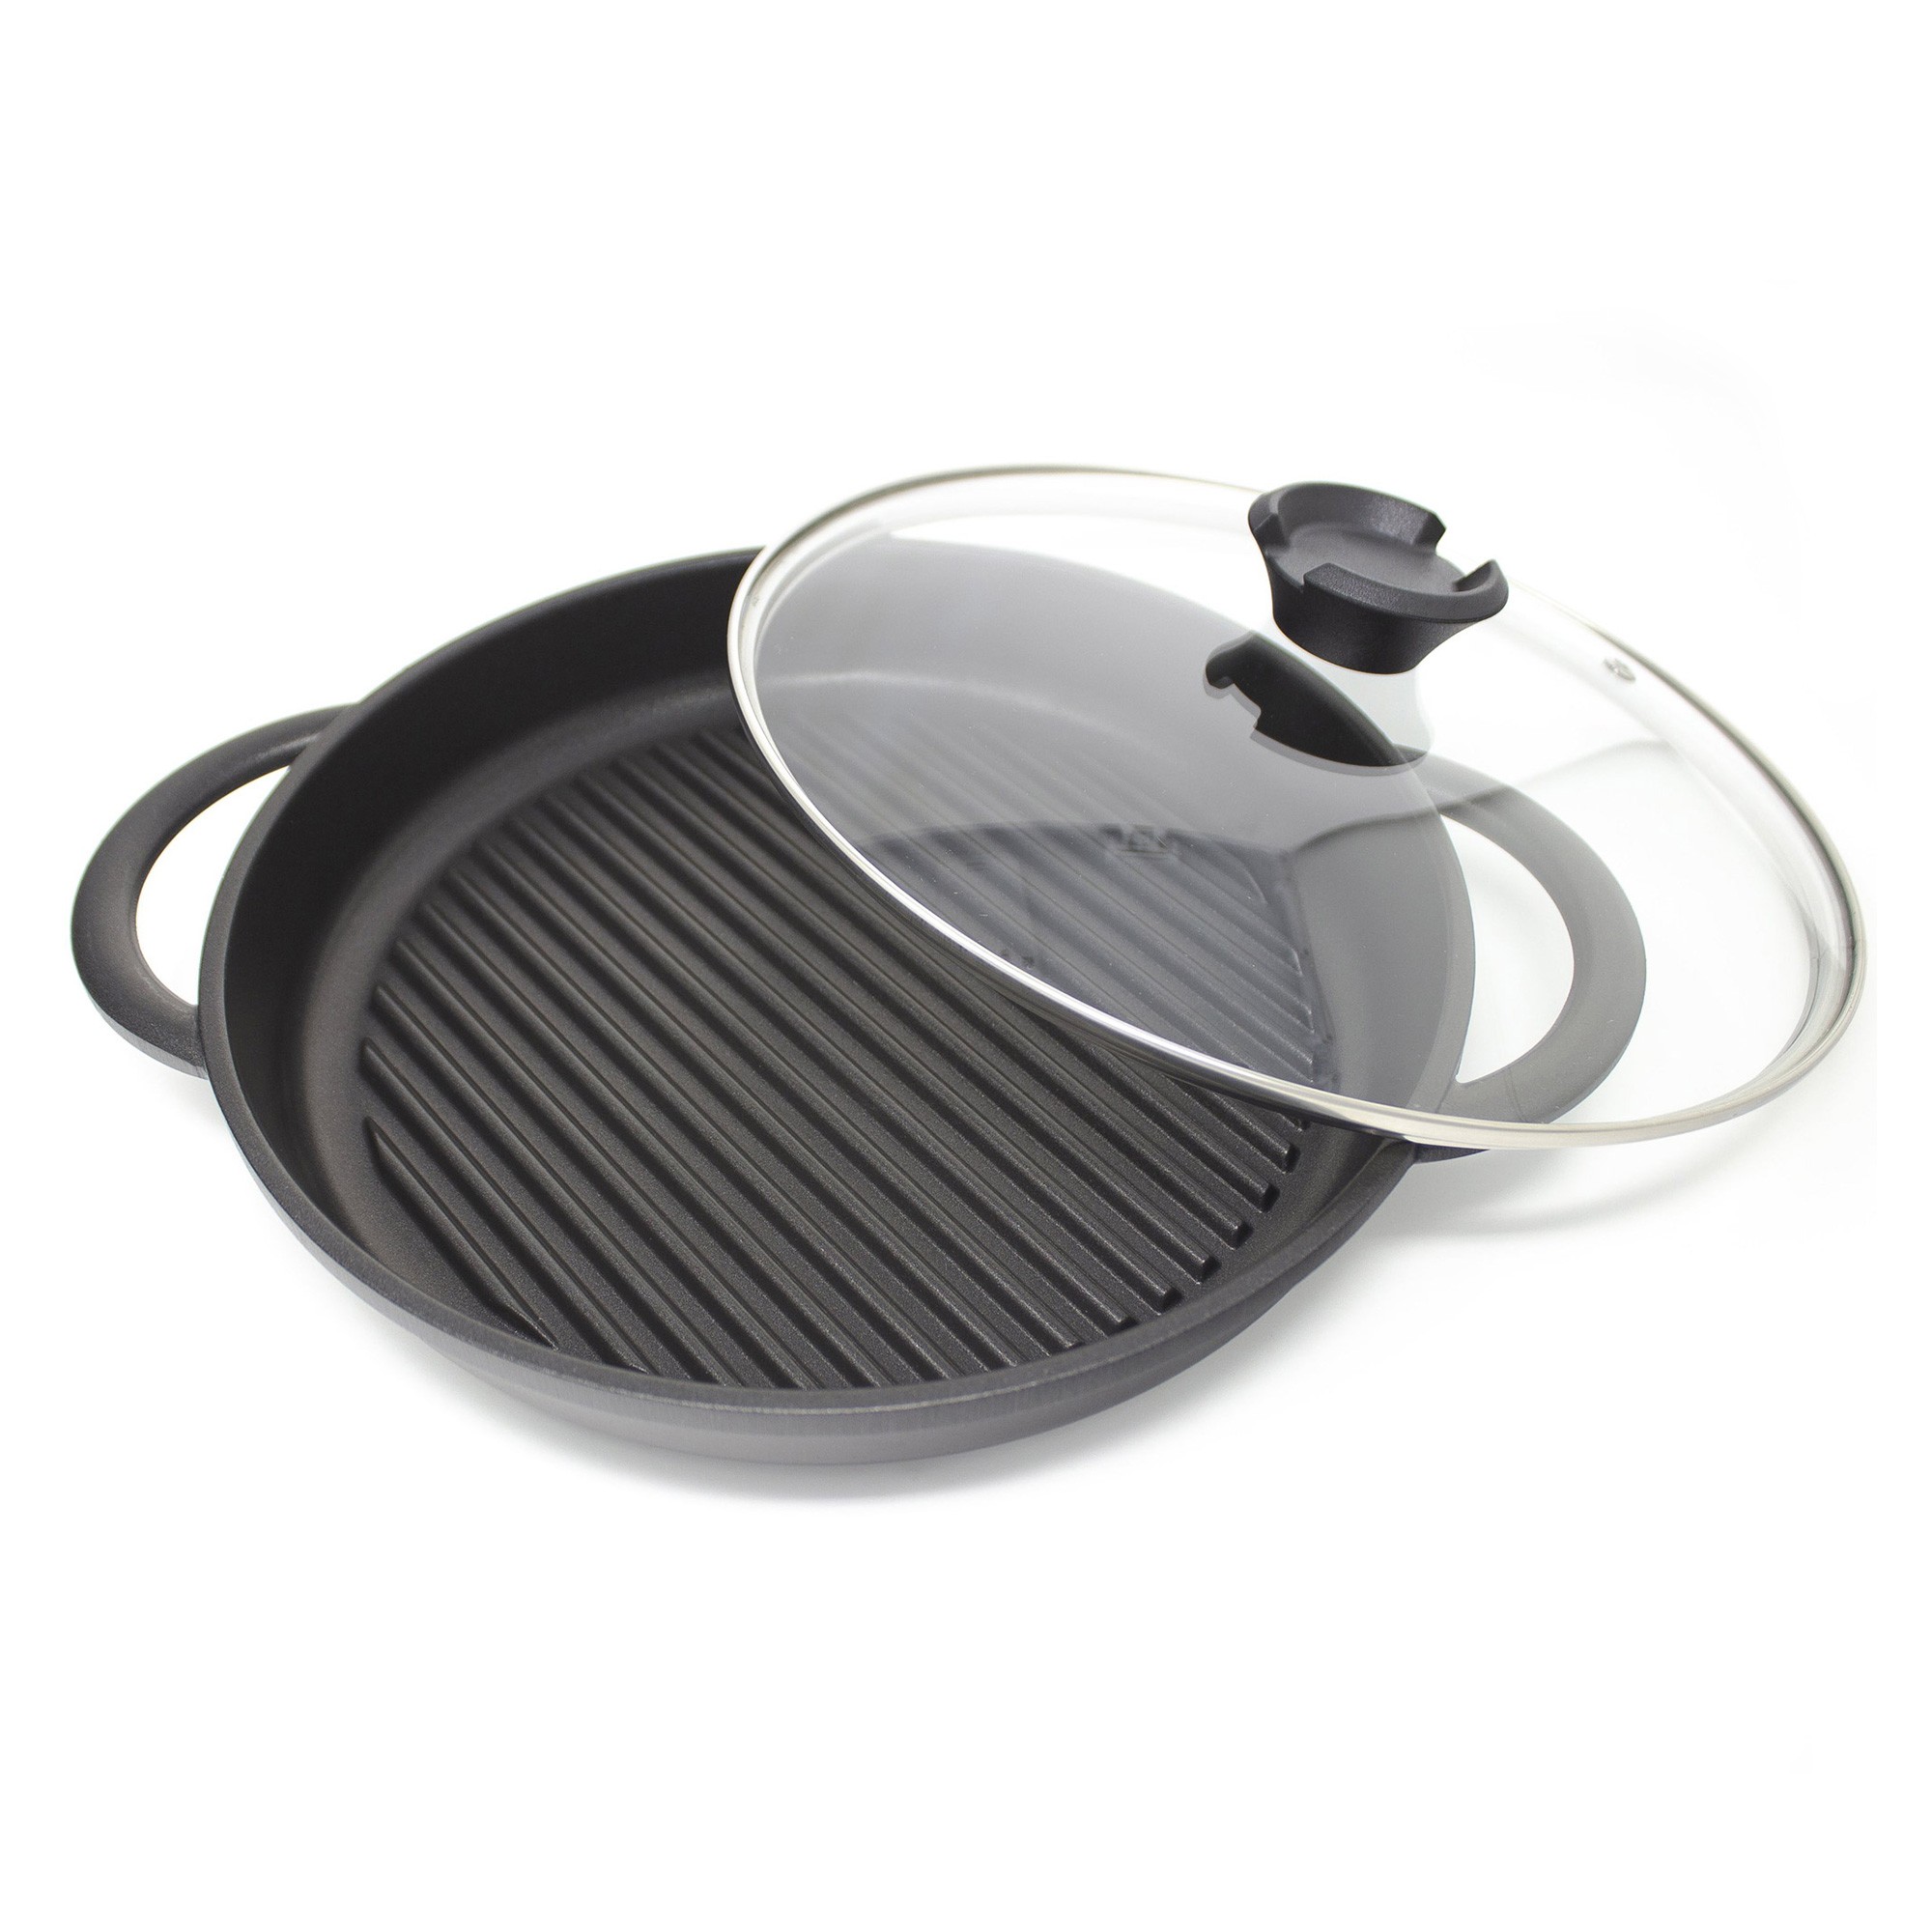 The 'Whatever Pan' by Professional Cookware Company 'Jean-Patrique' Review  – What's Good To Do